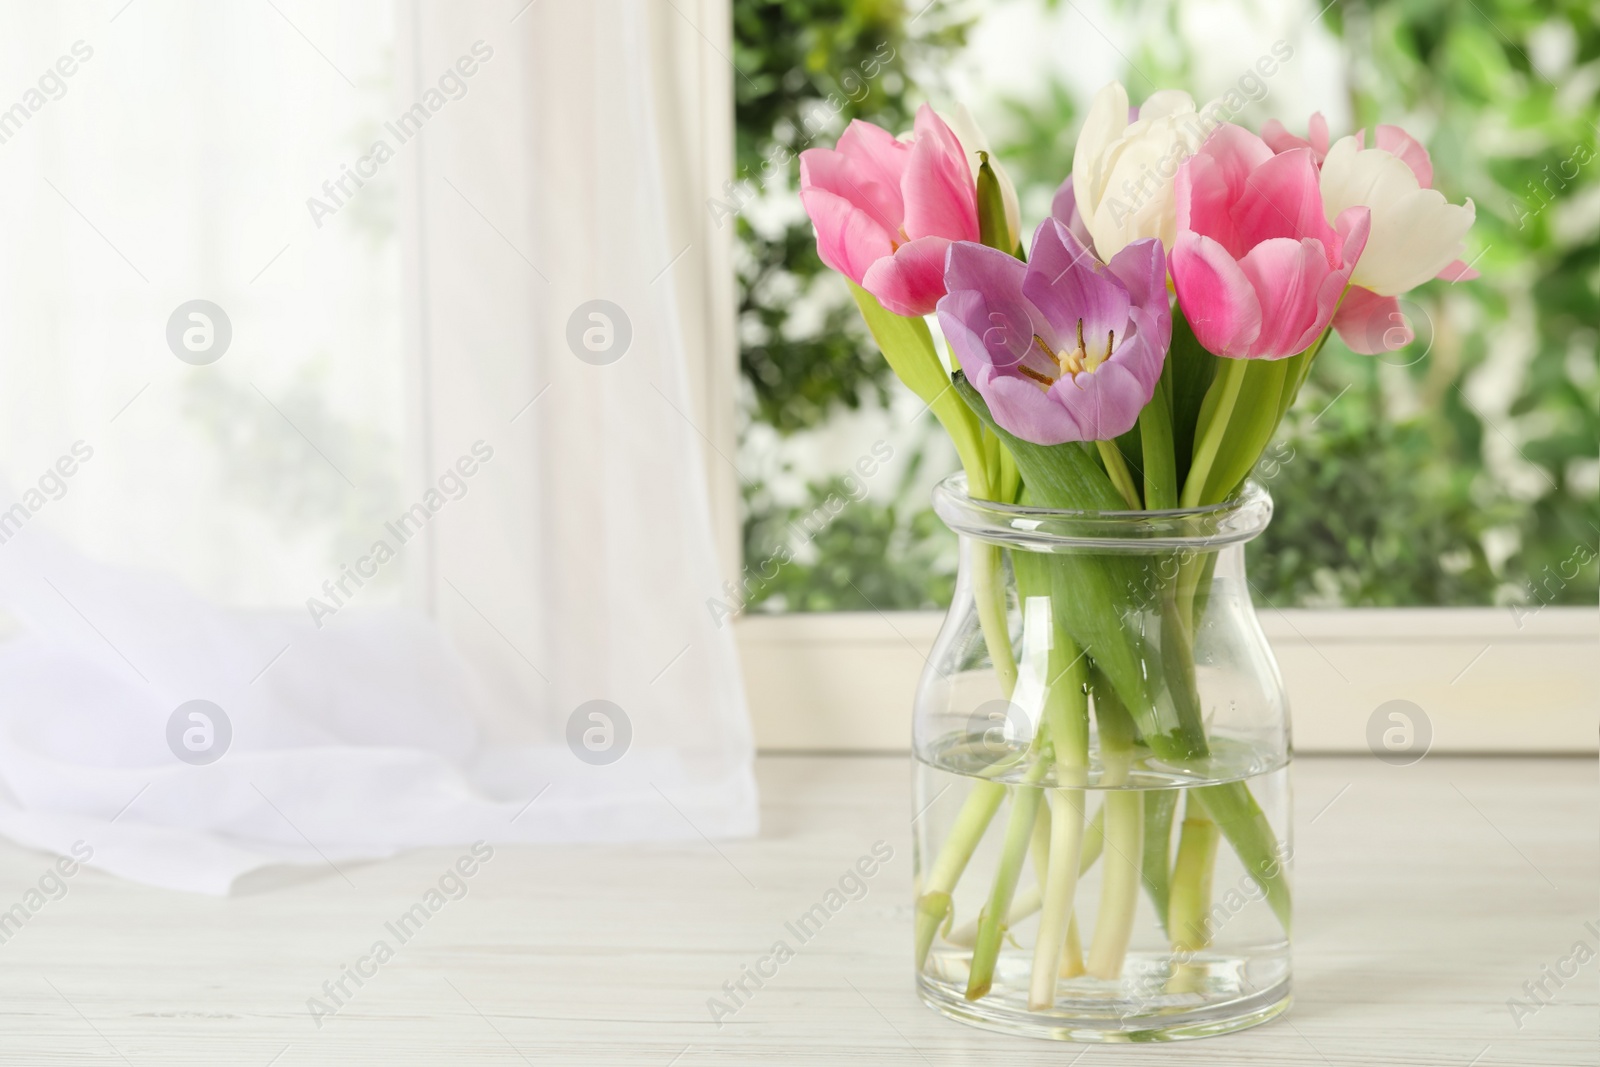 Photo of Beautiful fresh tulips on window sill indoors. Spring flowers